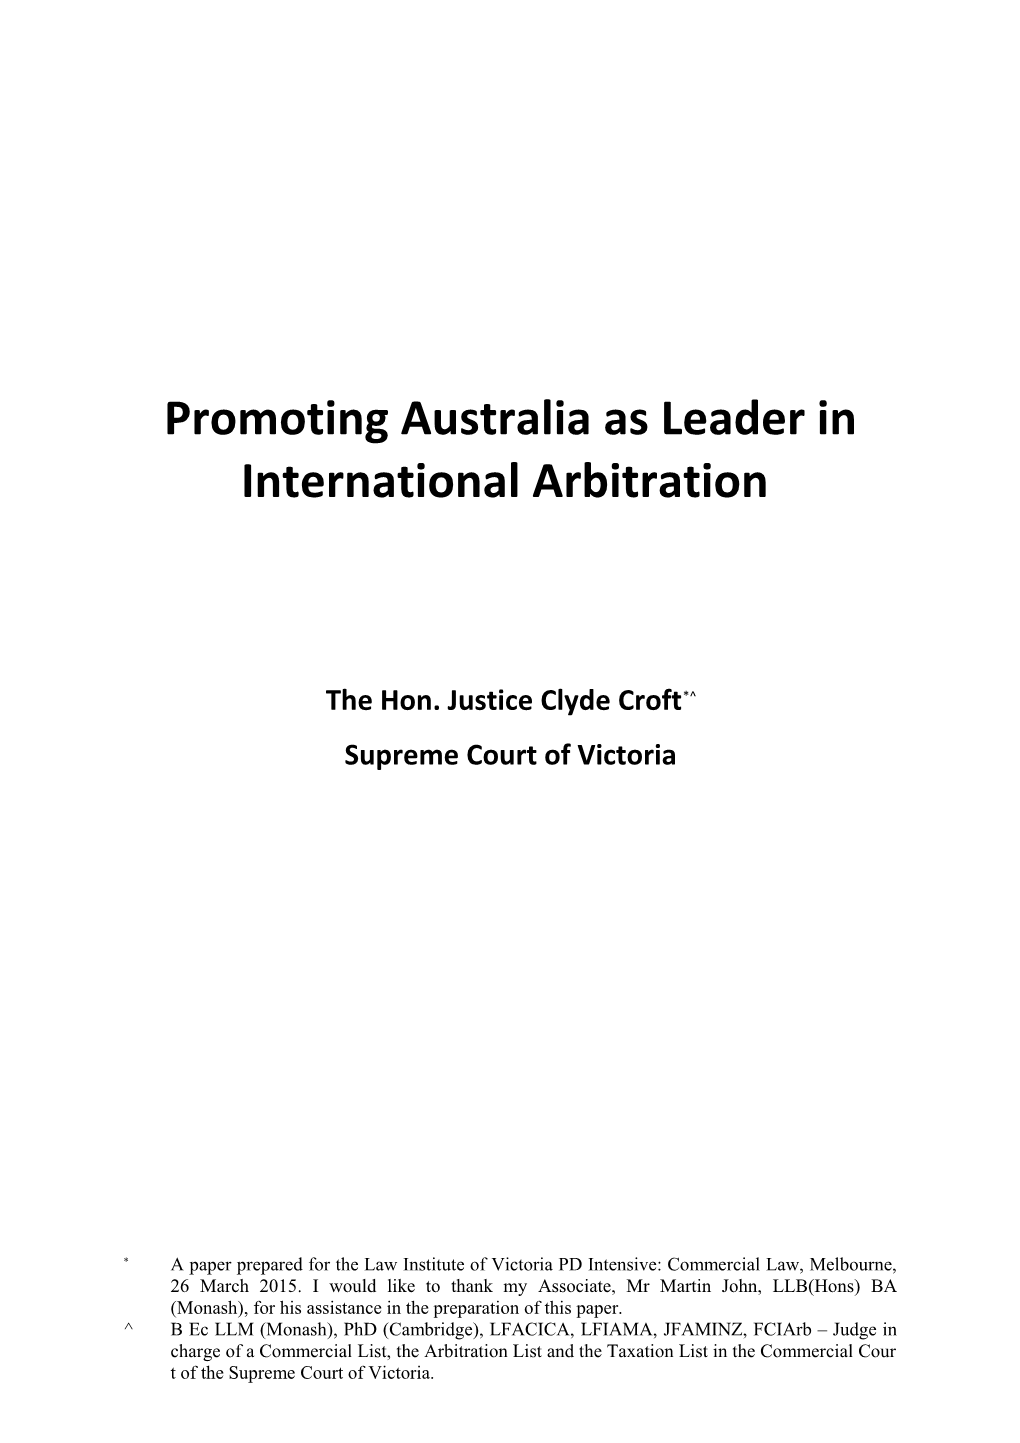 Promoting Australia As an Attractive Arbitral Hub